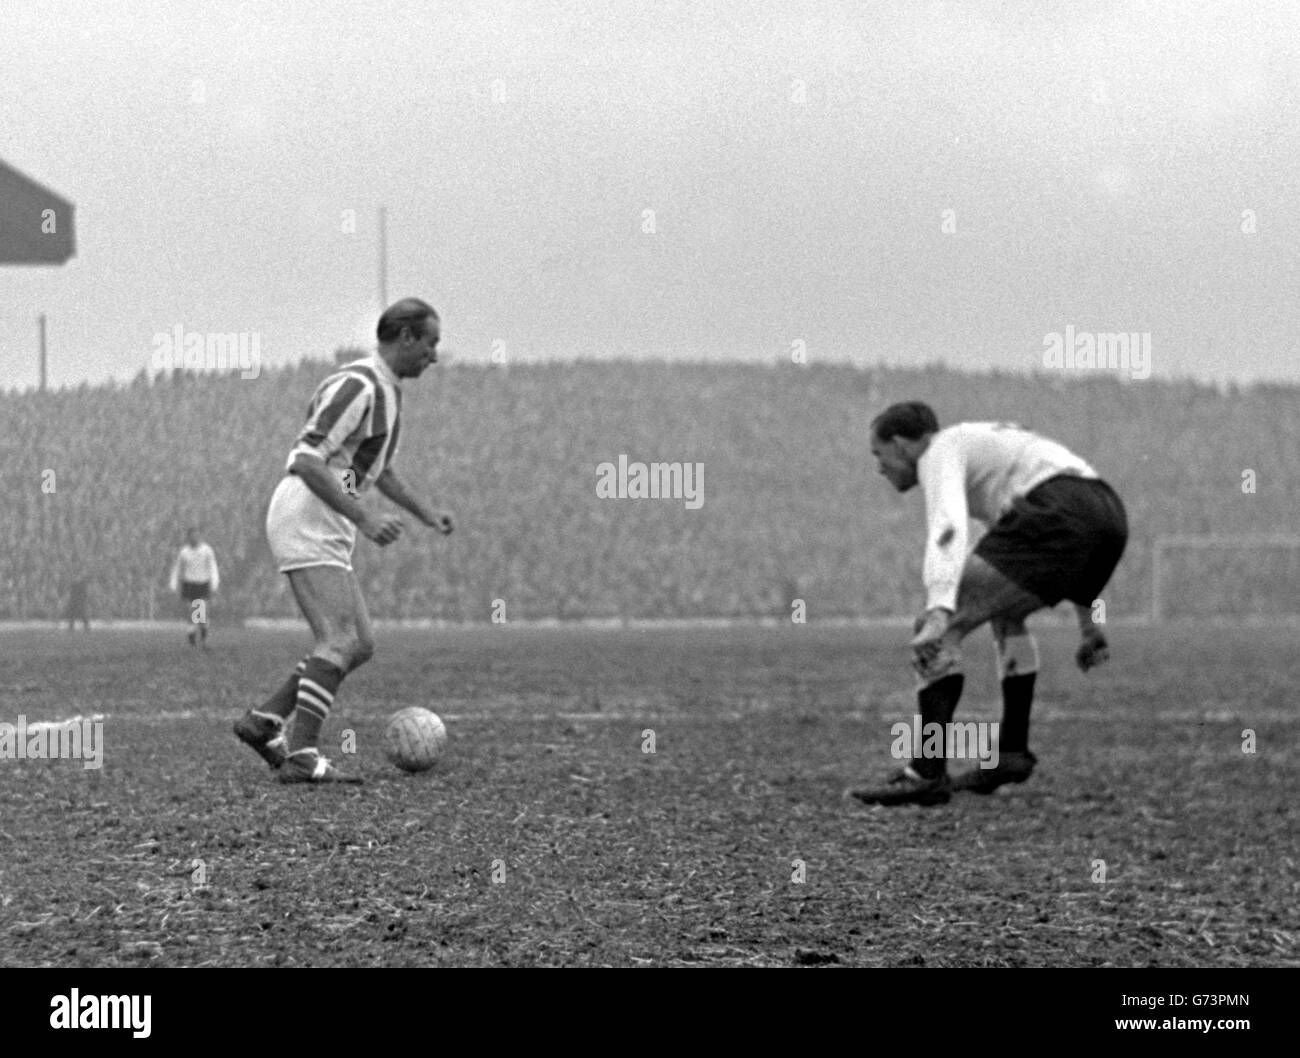 Could it be a case of the more he looks, the less he'll see? The 50-year-old feet of outside right wizard Stanley Matthews keep their magic still, and Fulham left-back Langley (who is 36) keeps his eyes riveted on them in this confrontation during the First Division match at Stoke. Matthew, whose glorius soccer career has culminated in a knighthood, was making his 699th League appearance. He helped Stoke City to a 3-1 victory. Stock Photo